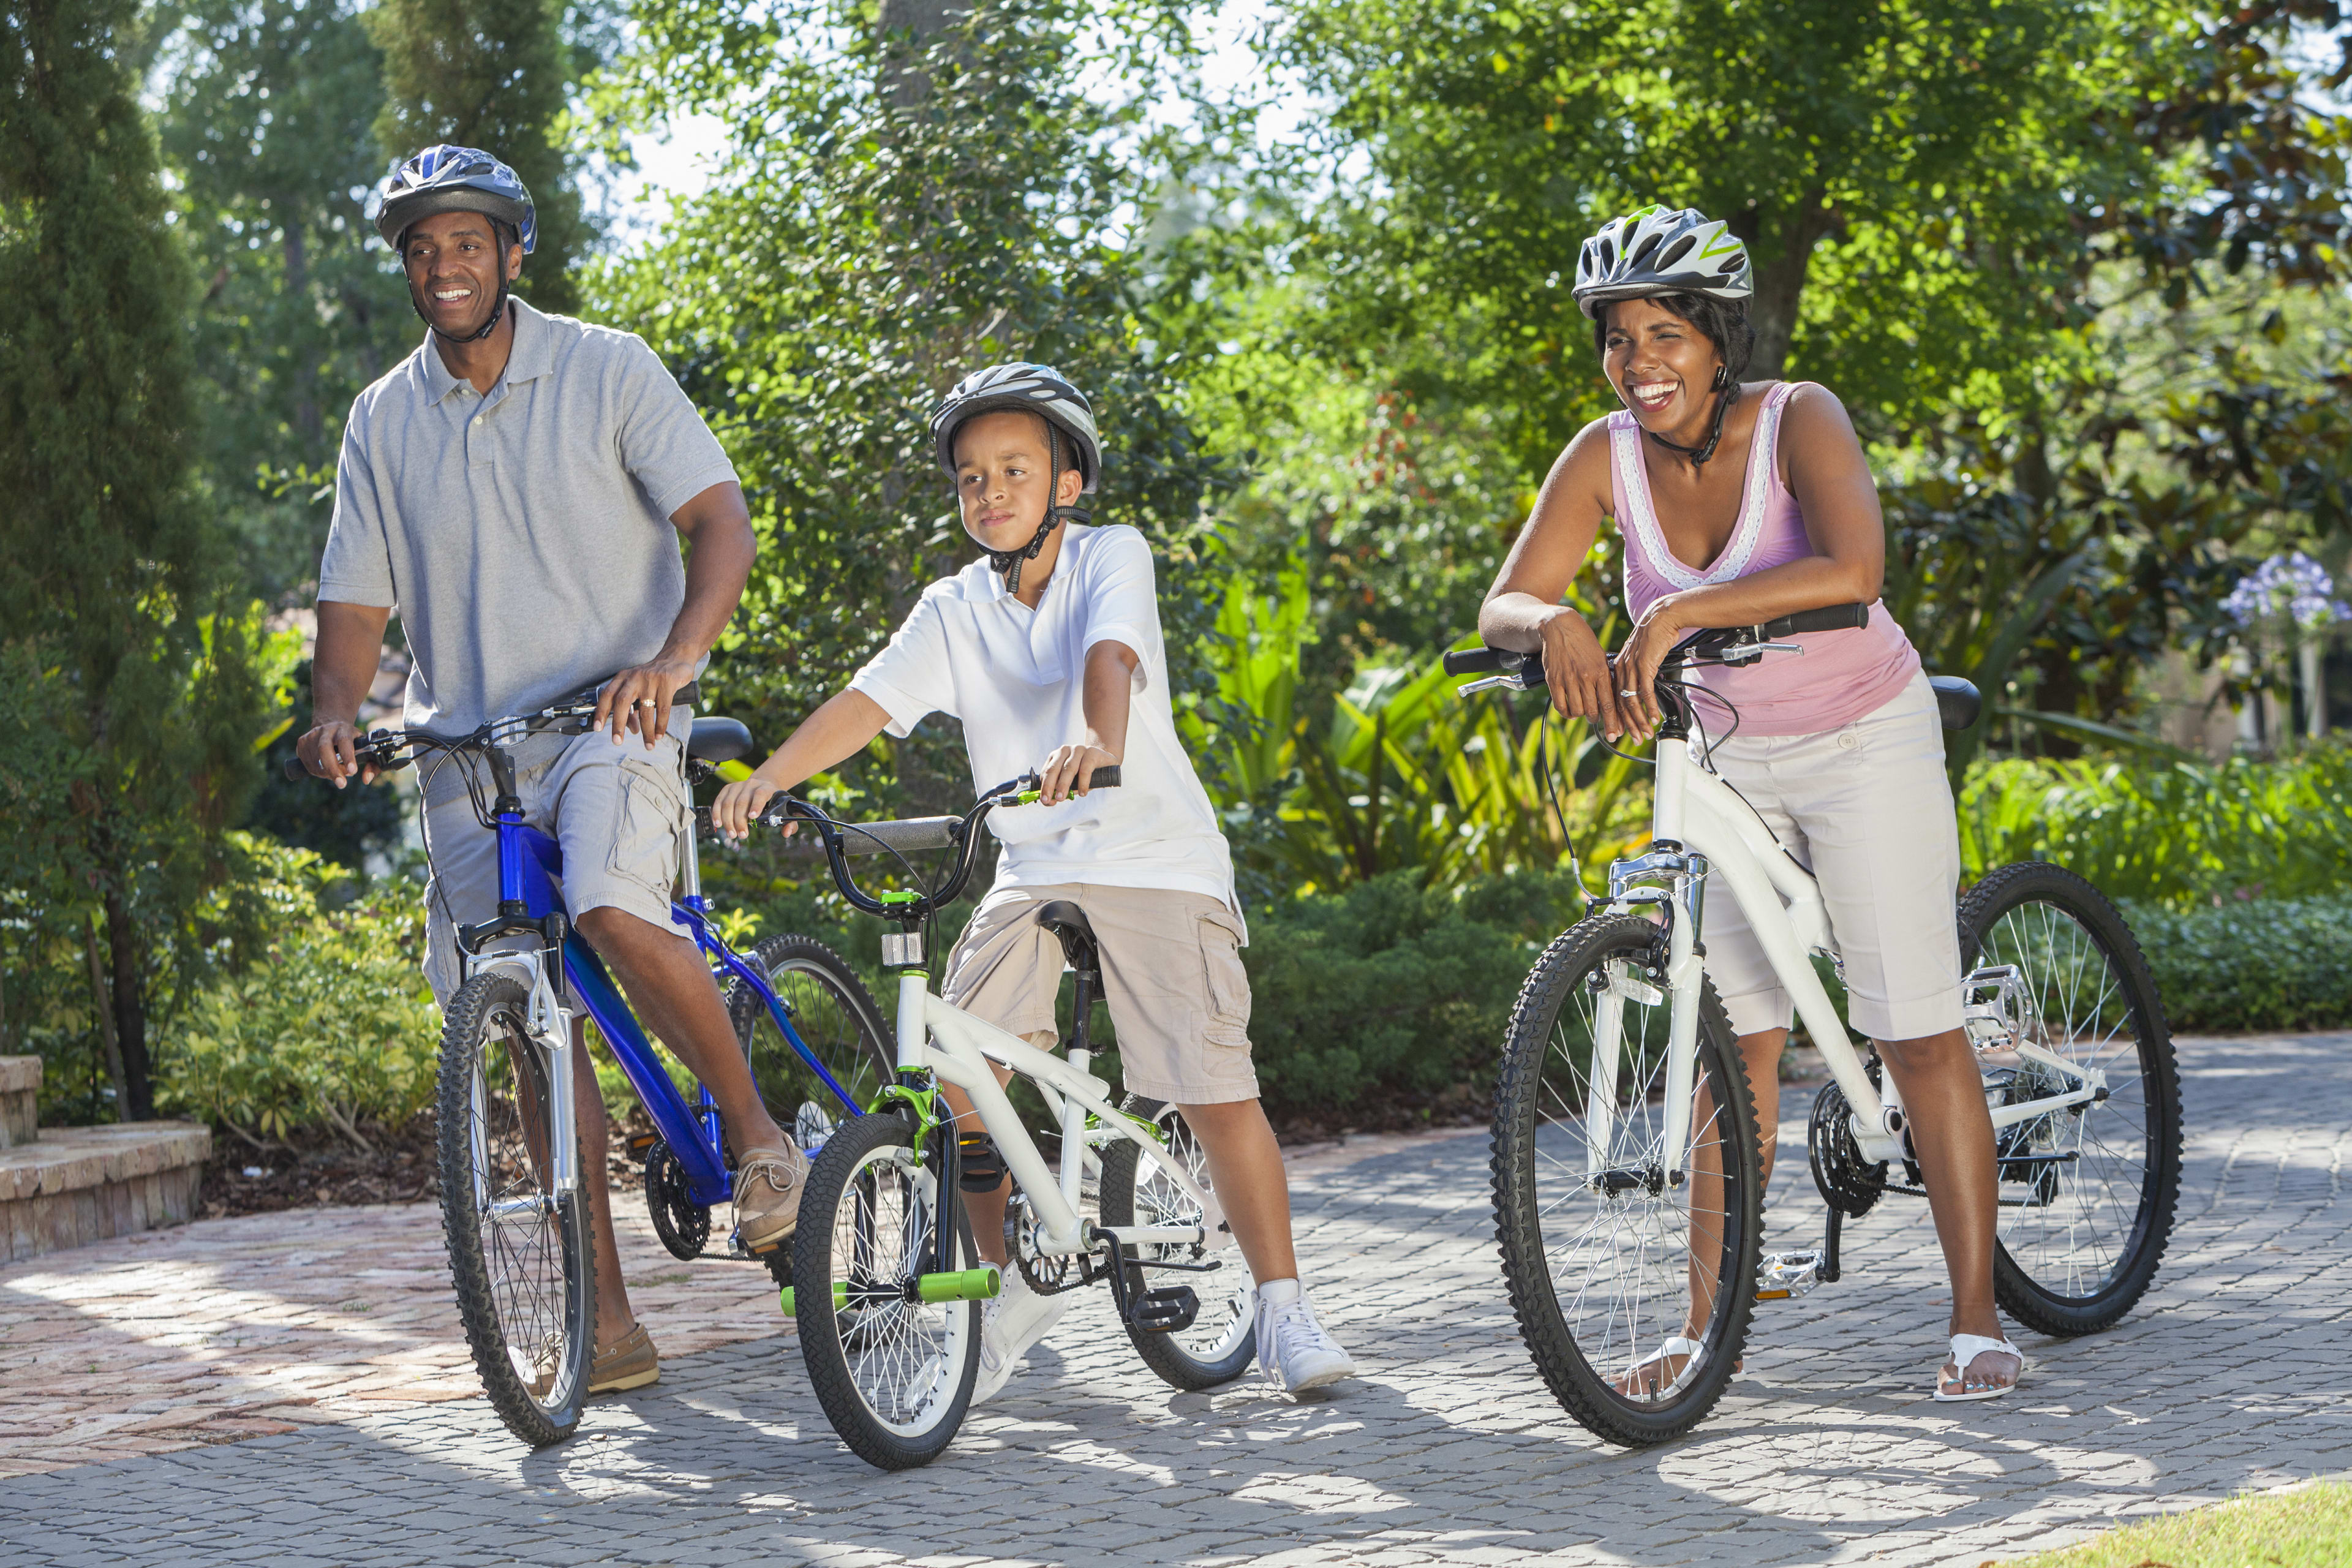 Family of three on bikes riding down paved path surrounded by trees